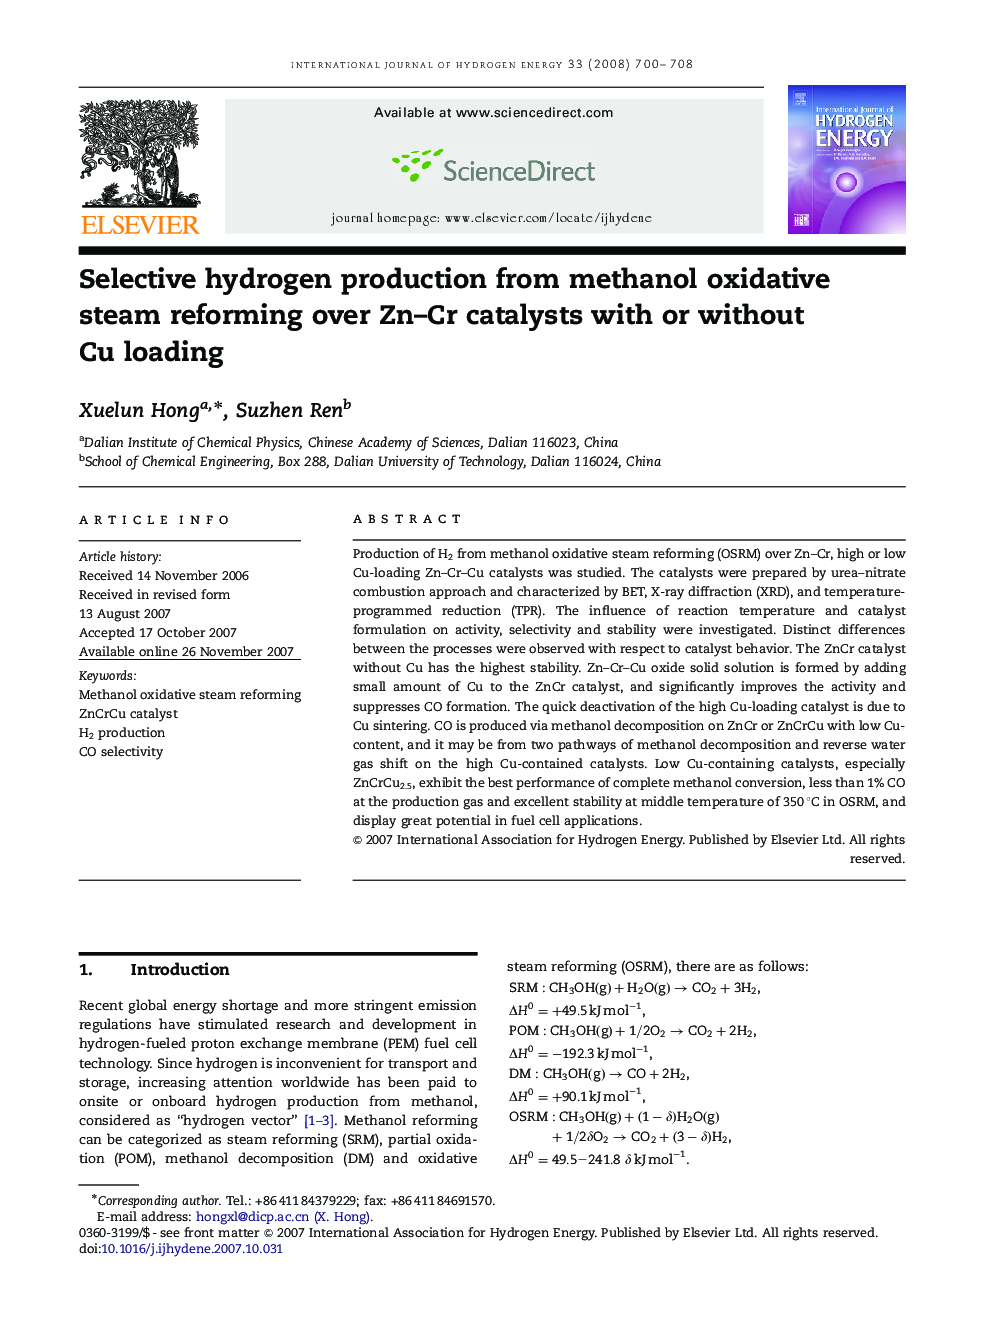 Selective hydrogen production from methanol oxidative steam reforming over Zn–Cr catalysts with or without Cu loading